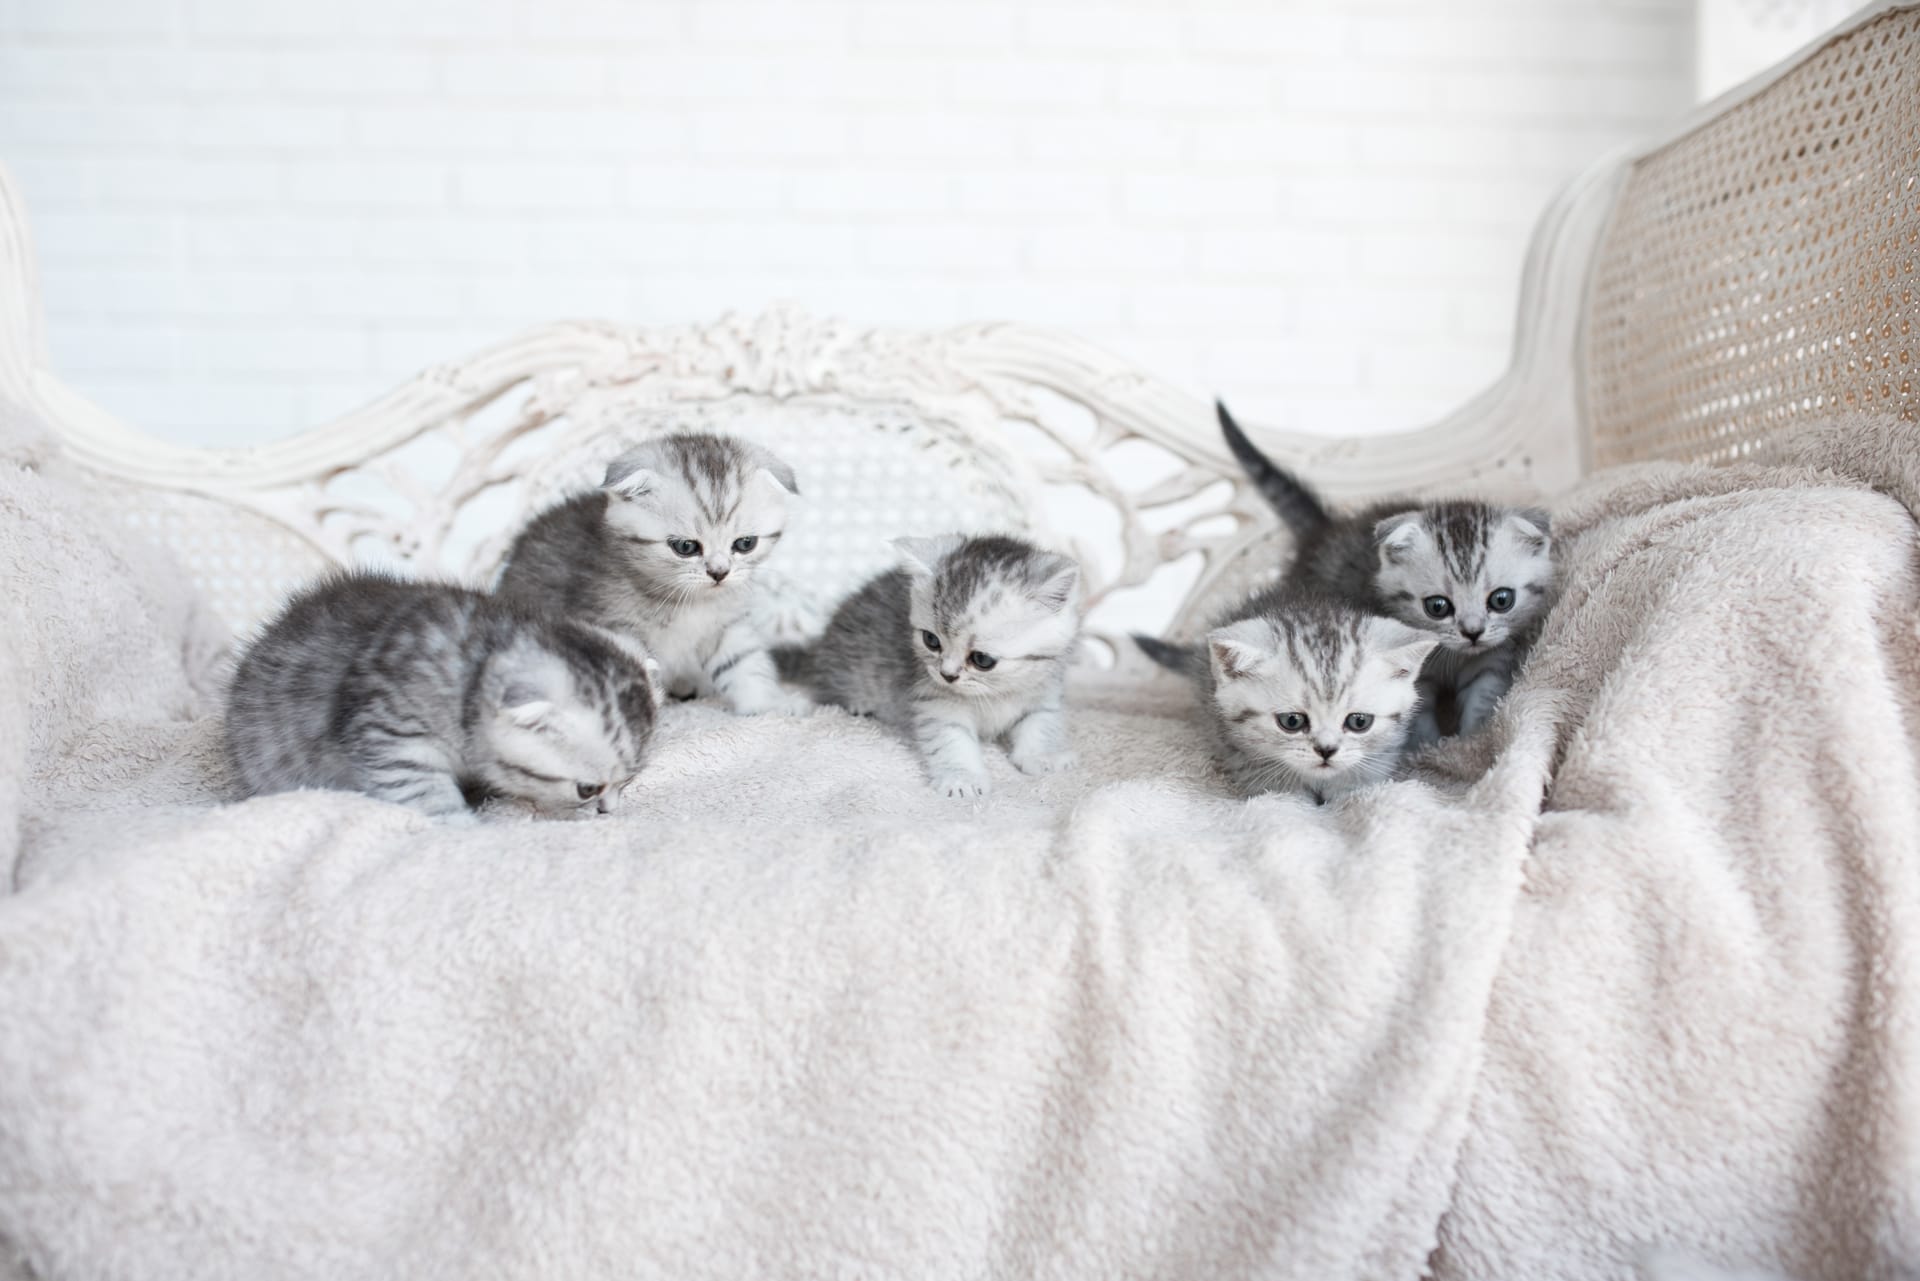 Cute animal profile pictures american shorthair kittens play grey couch